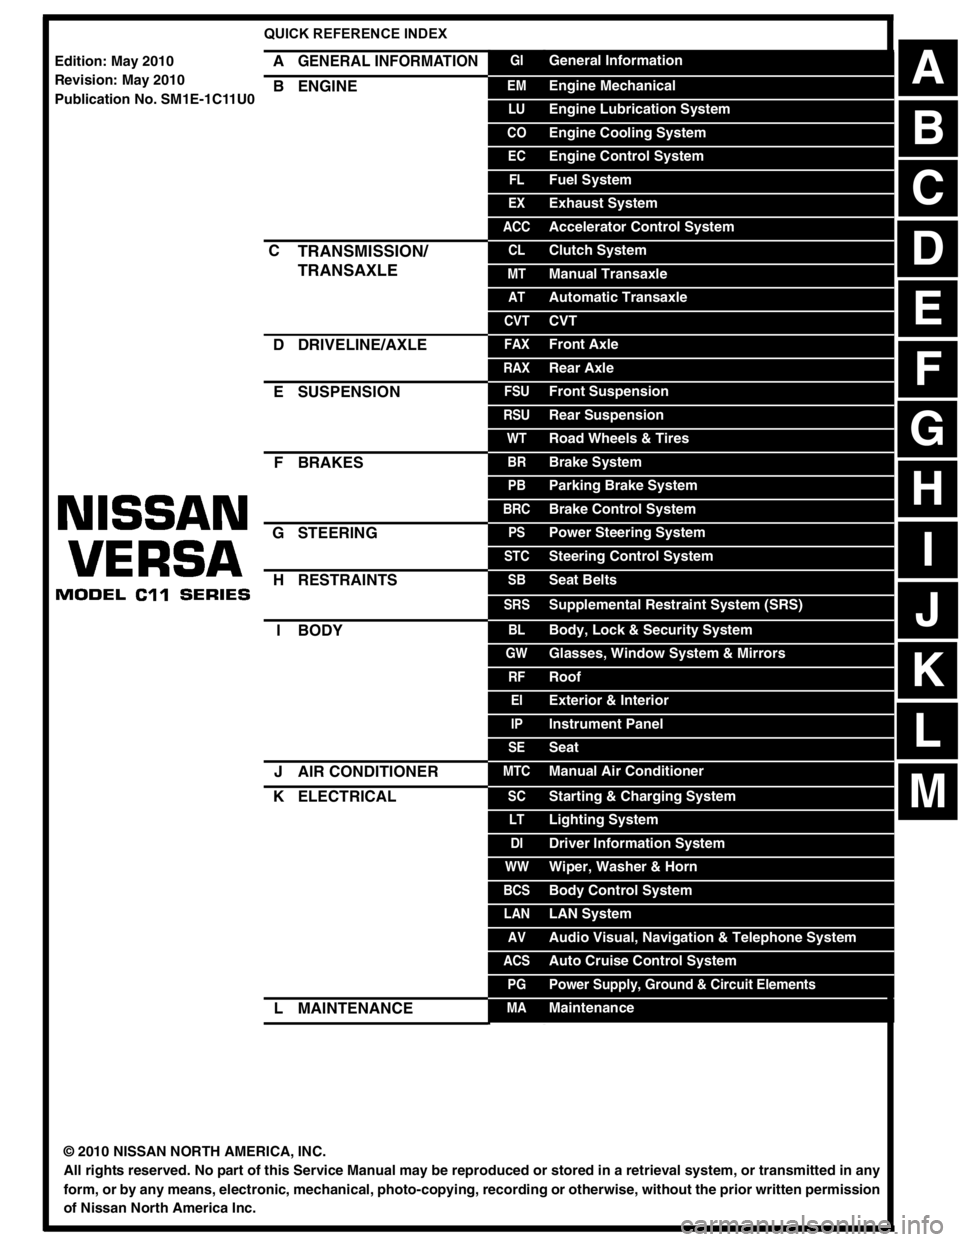 NISSAN LATIO 2011  Service Repair Manual -1
QUICK REFERENCE INDEX 
AGENERAL INFORMATIONGIGeneral Information
BENGINEEMEngine Mechanical
LUEngine Lubrication System
COEngine Cooling System
ECEngine Control System
FLFuel System
EXExhaust Syste